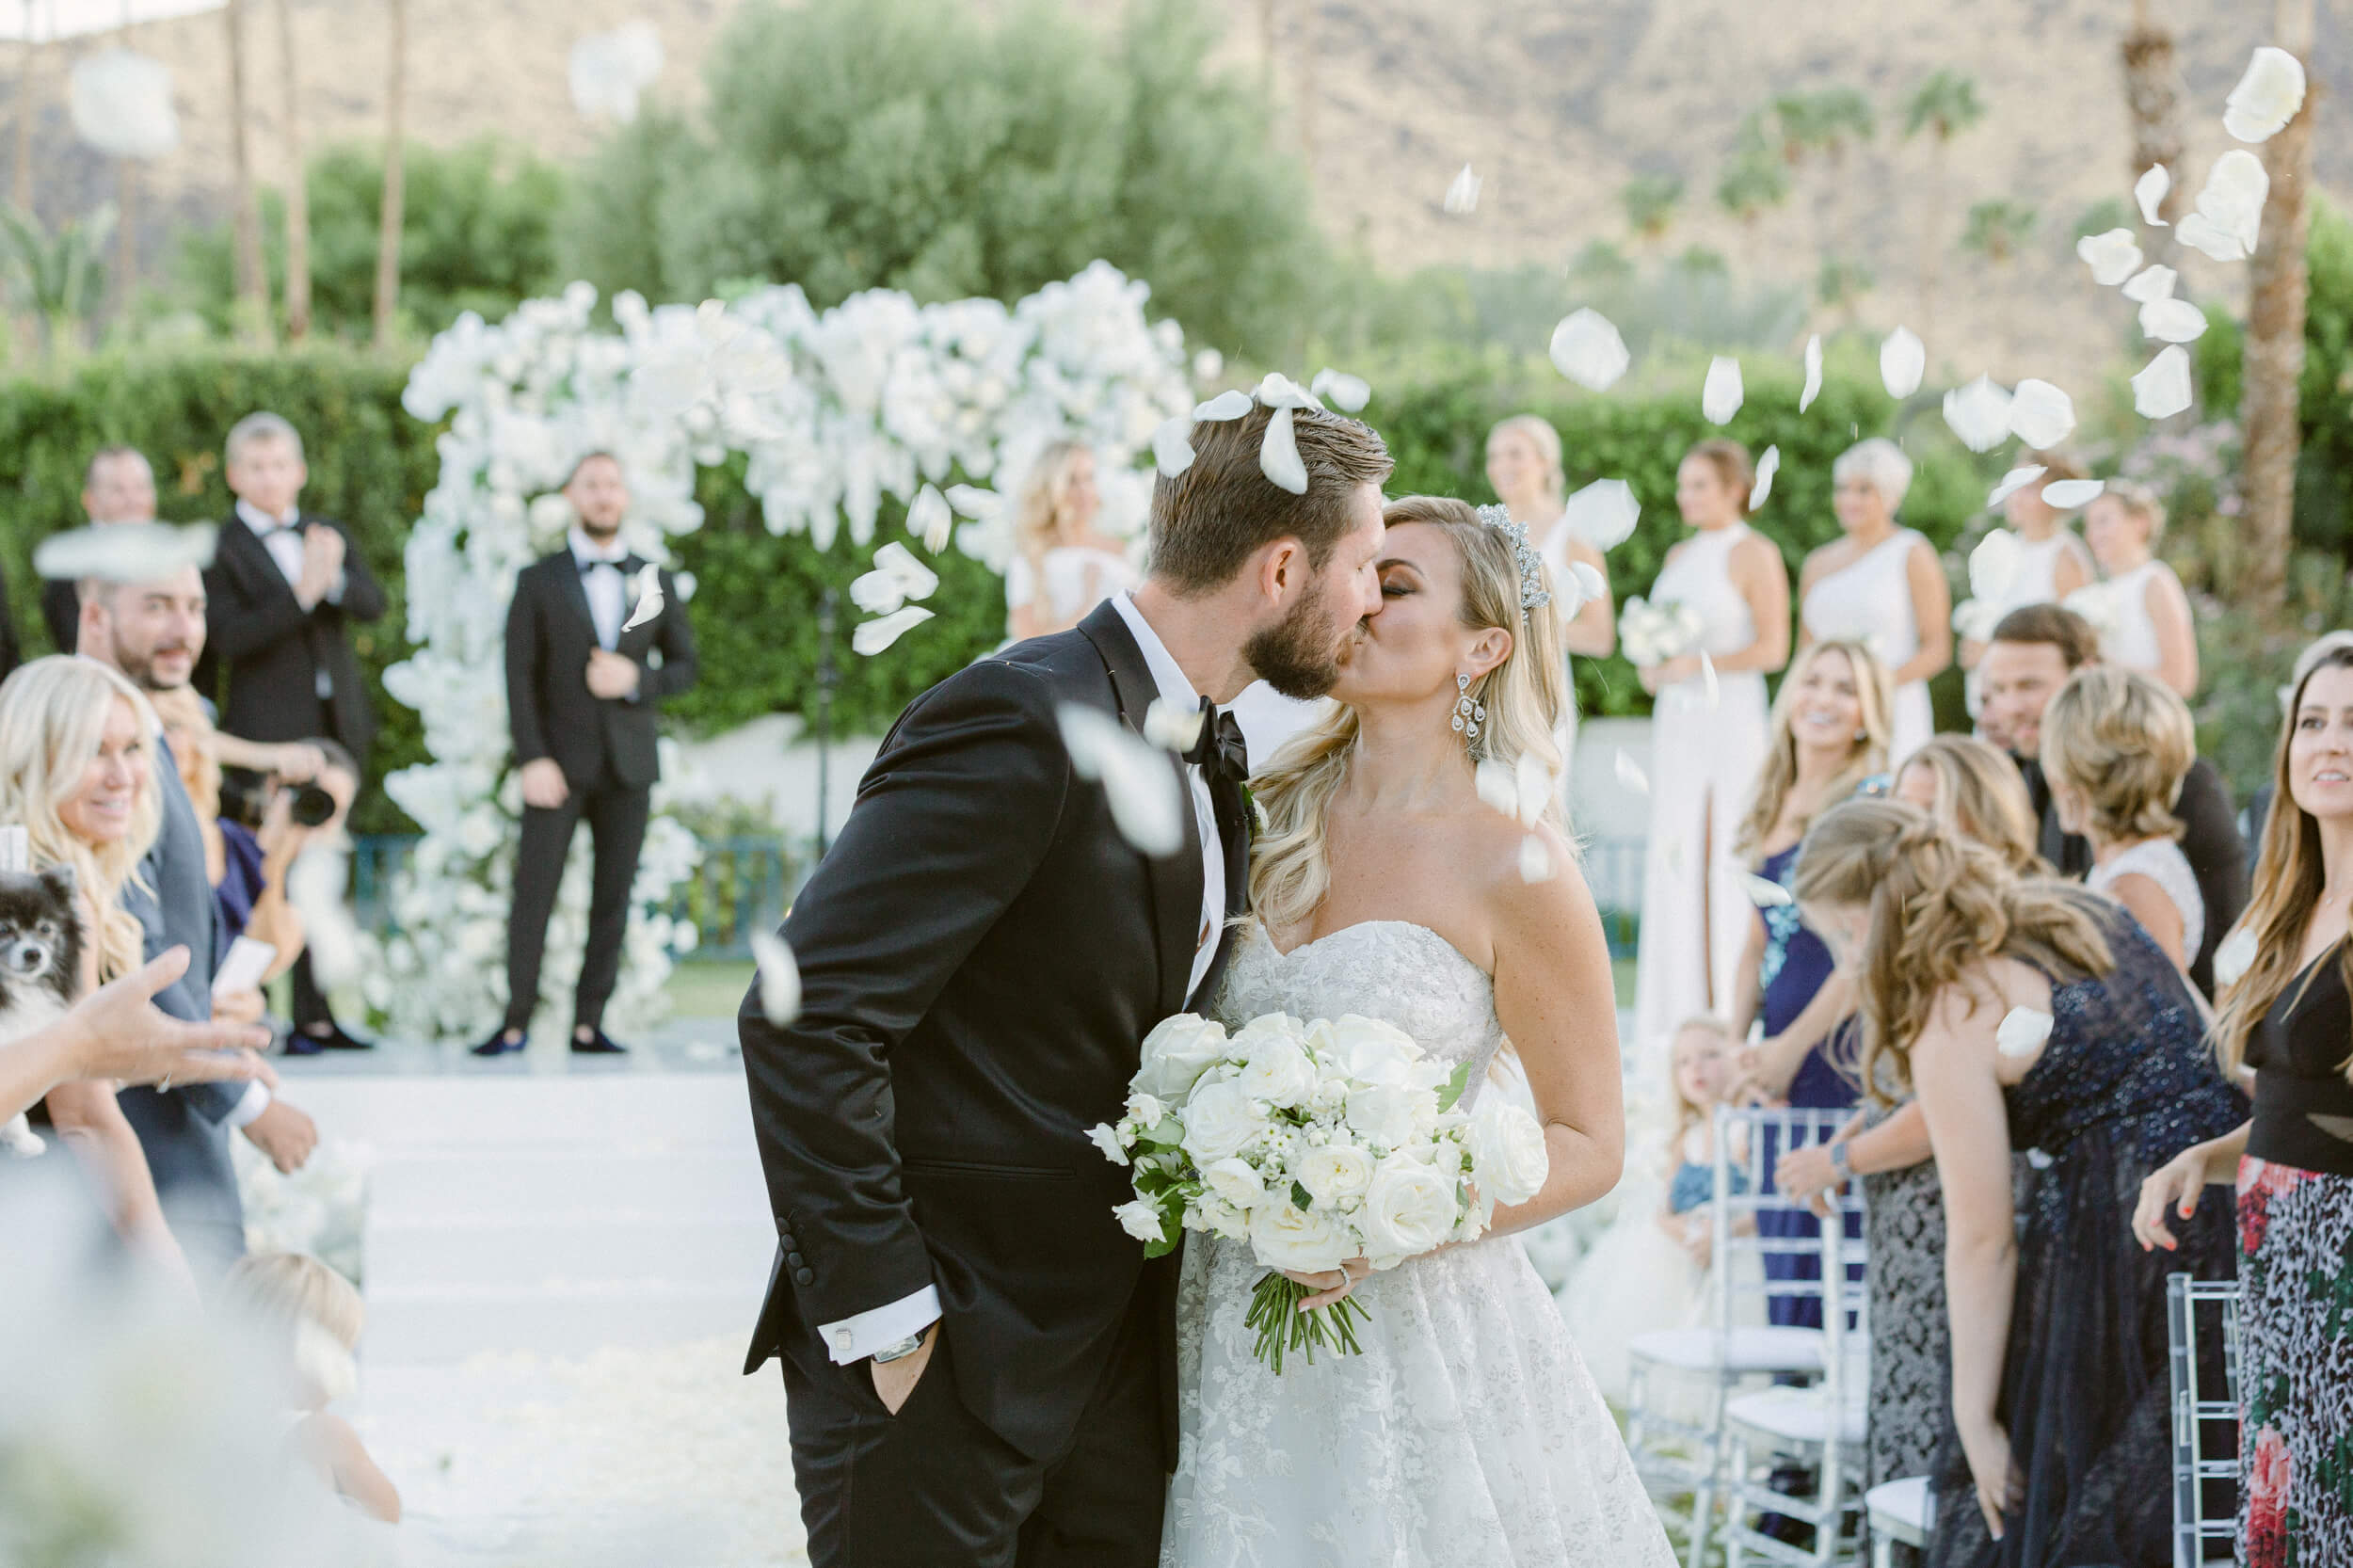 Palm Springs wedding designed by top wedding planner Layne Povey